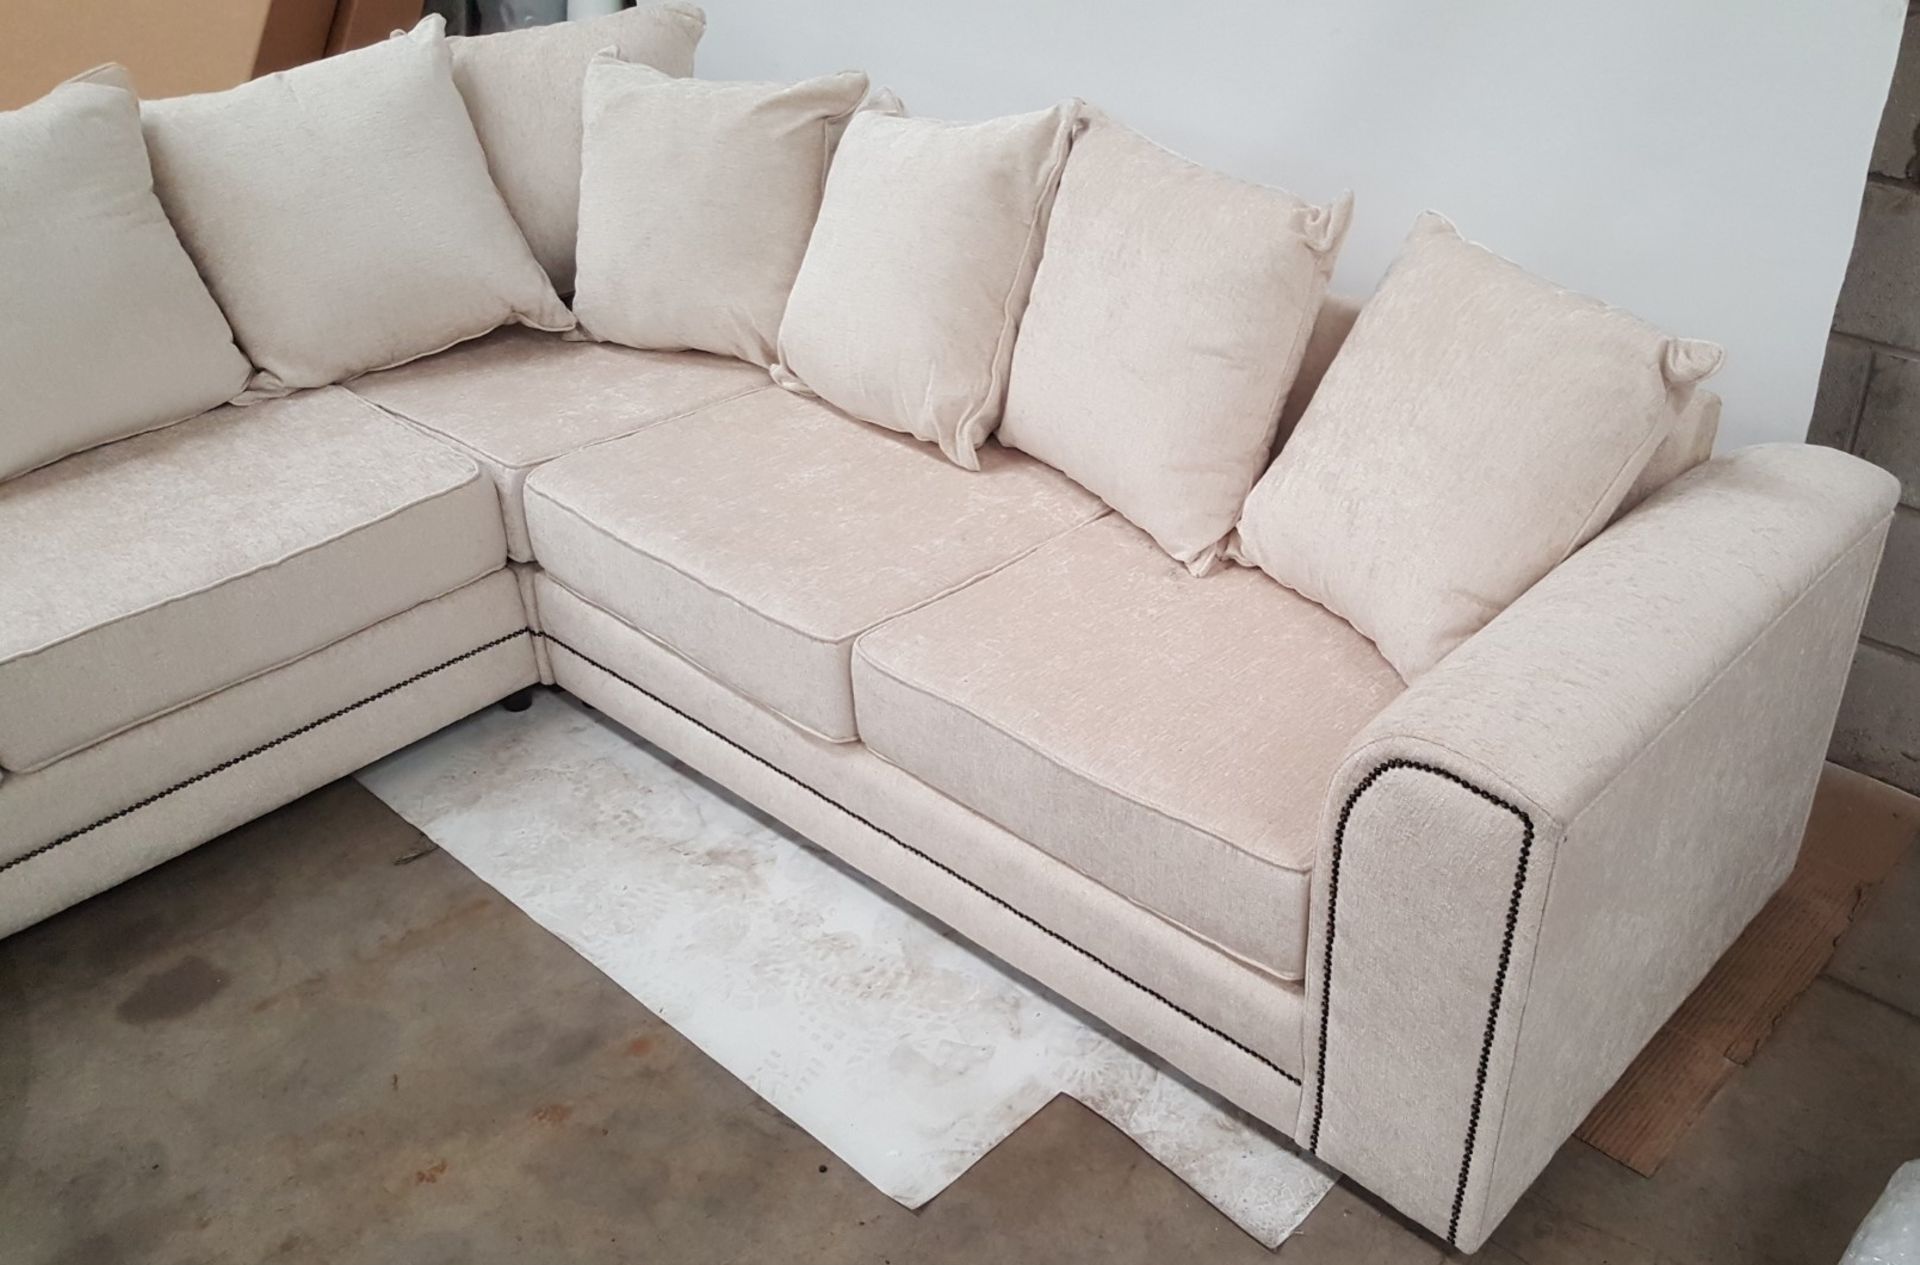 1 x Luxurious Pearl White Fabric L-Shaped Corner Seater Sofa - Ref BY198 - Image 2 of 7